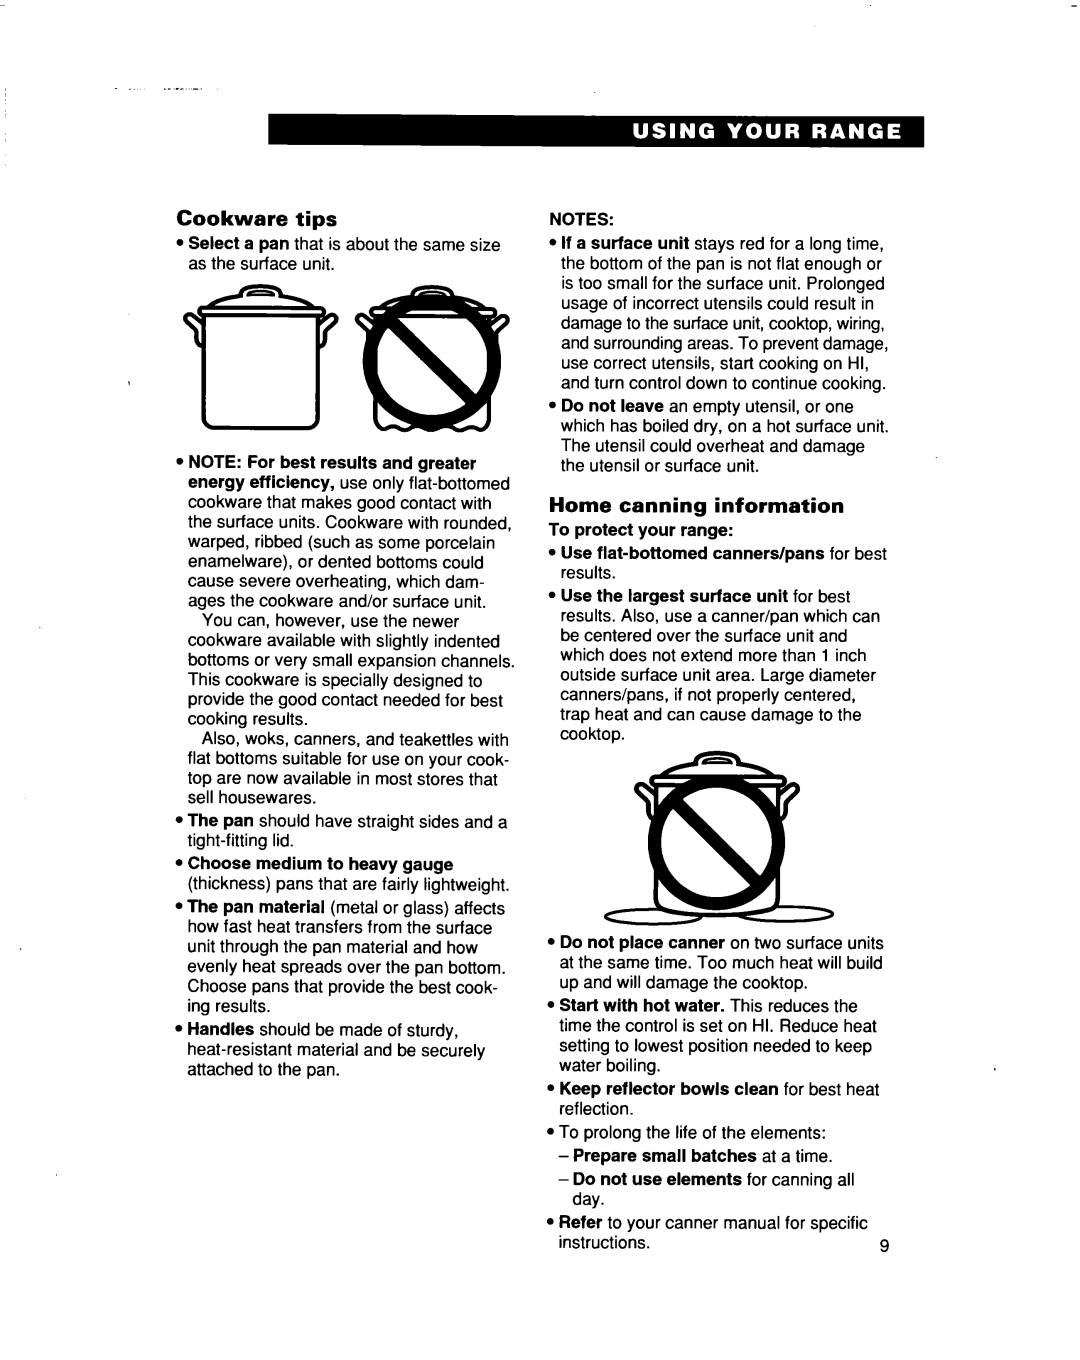 Whirlpool RF367PXD warranty Cookware tips, Home canning information 